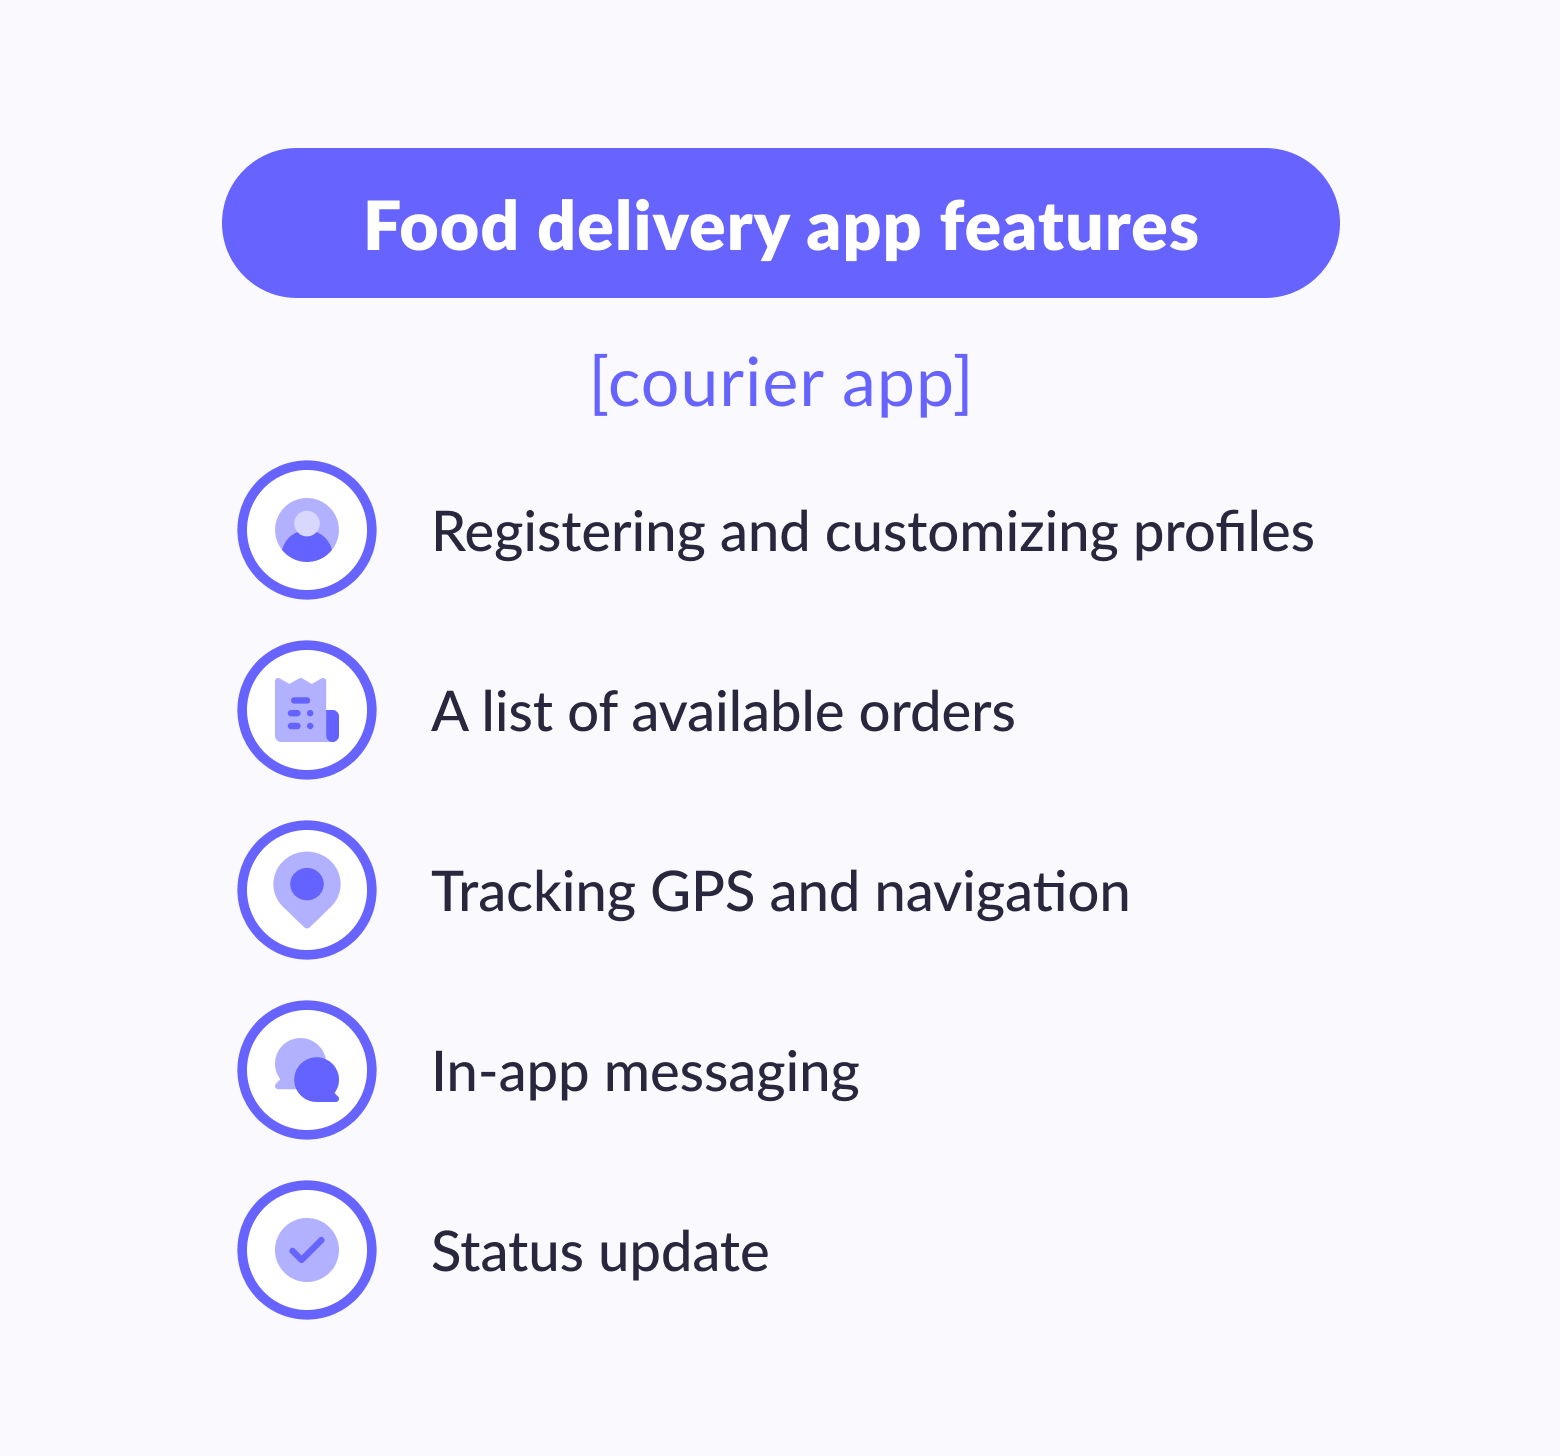 Food delivery app features of the courier app